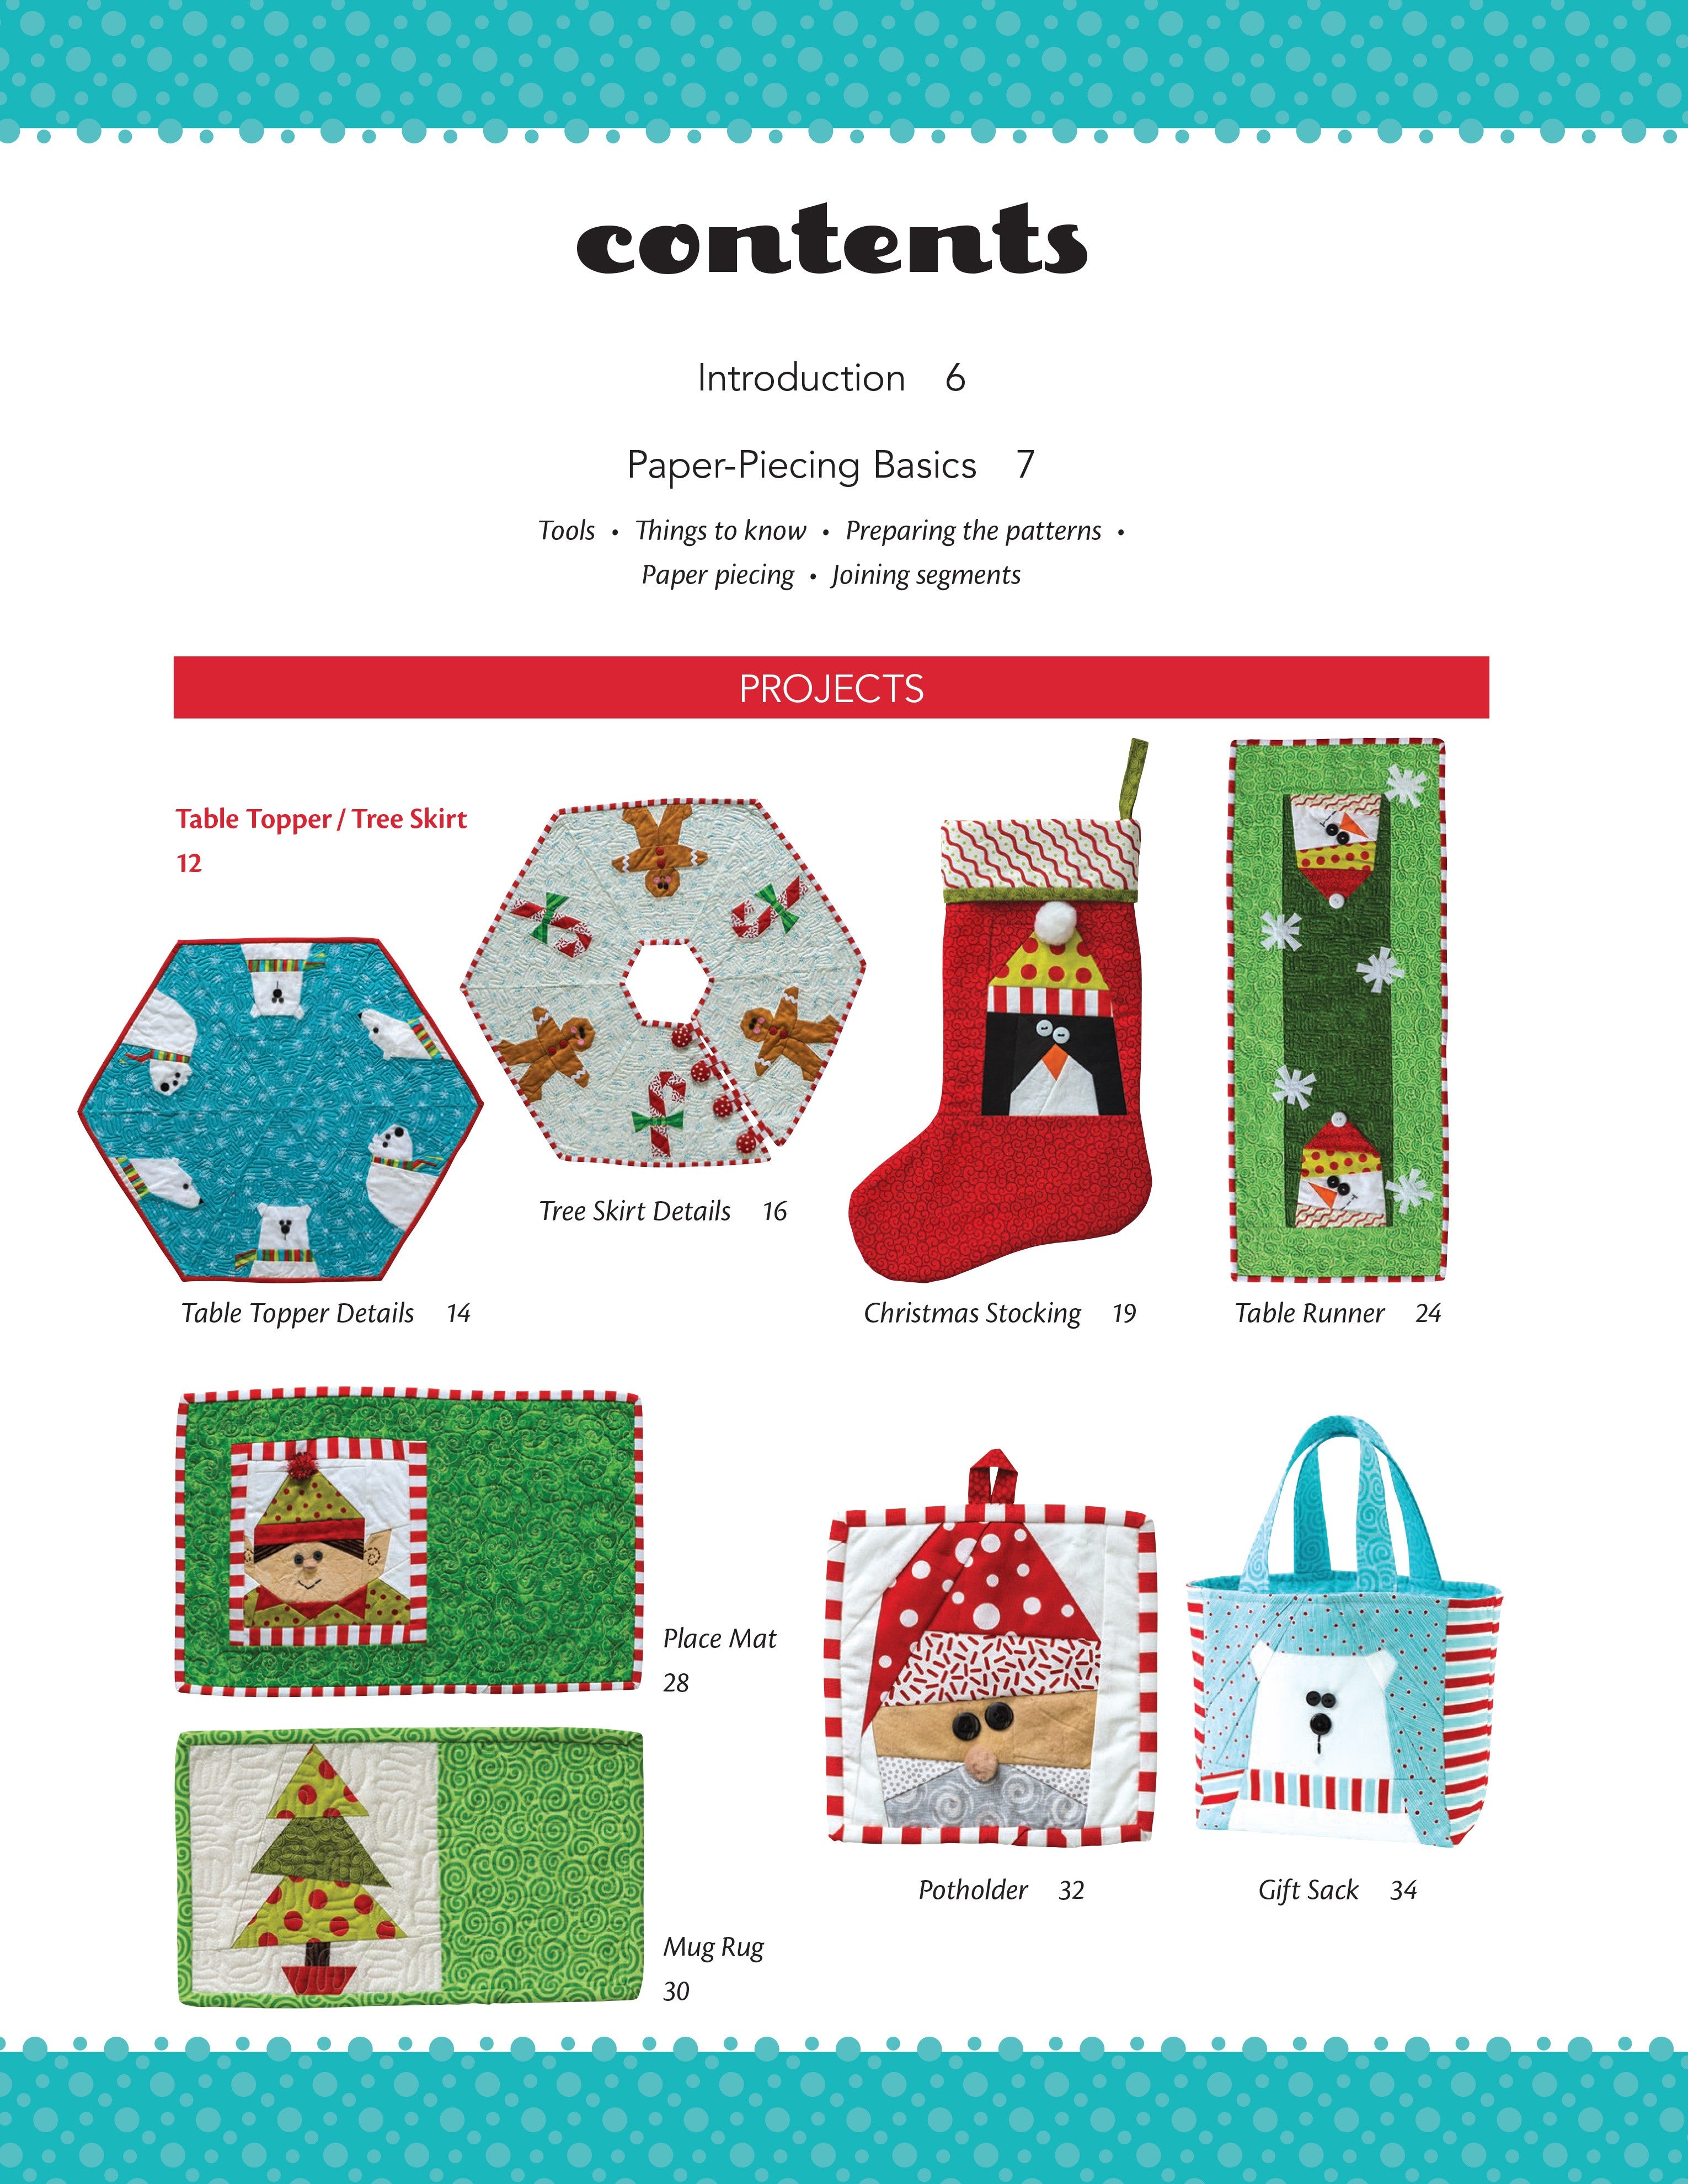 Sew Yourself A Merry Little Christmas Quilt Pattern Book by Mary Hertel for C&T Publishing